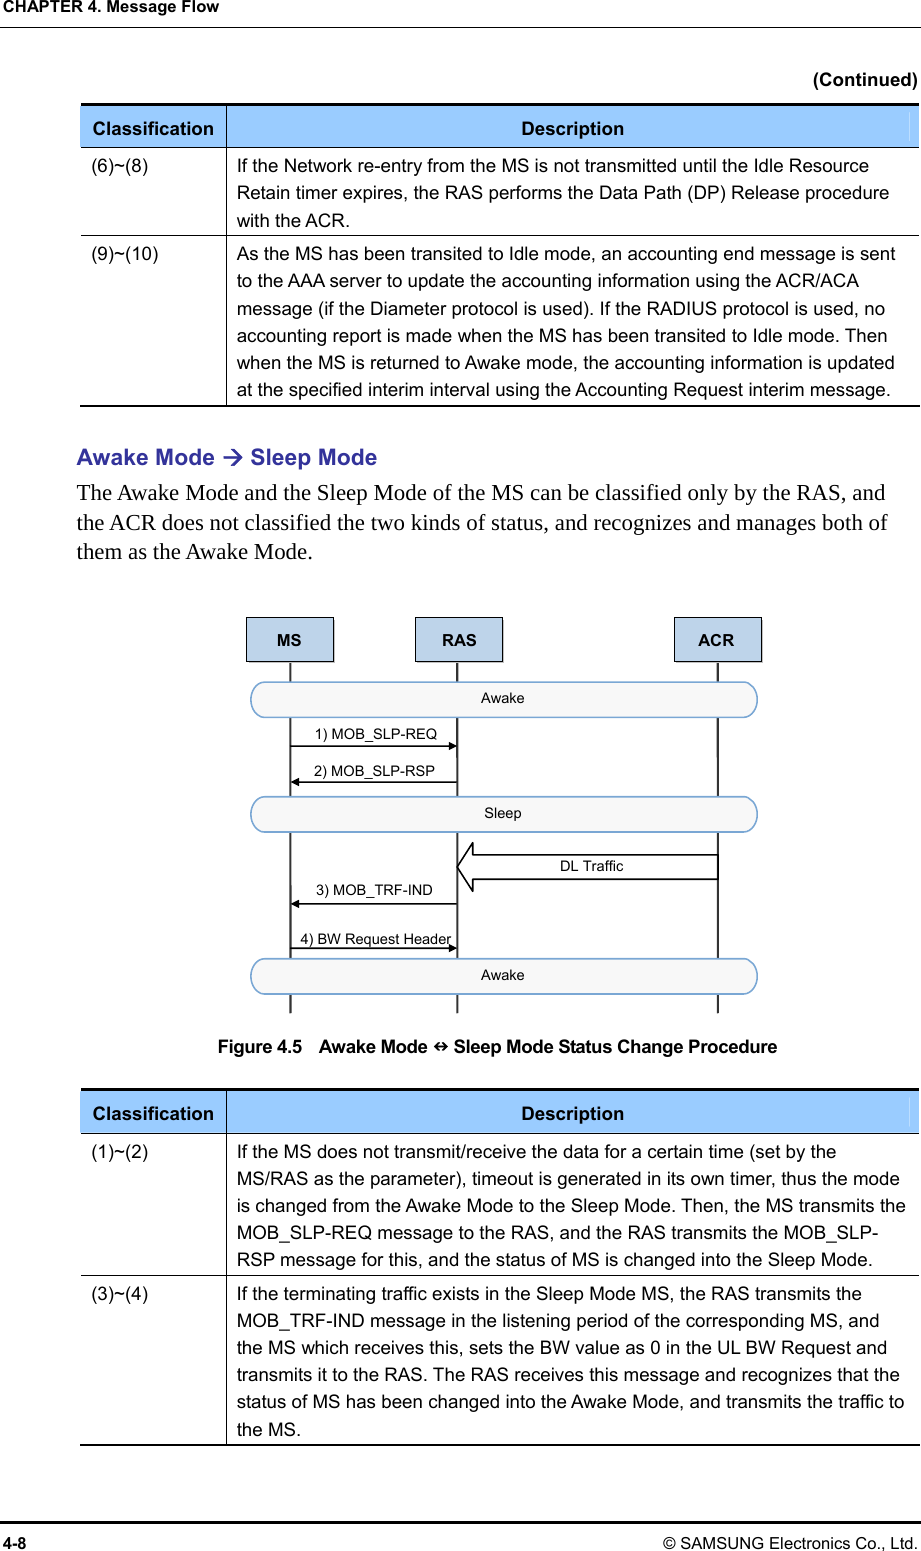 CHAPTER 4. Message Flow 4-8 © SAMSUNG Electronics Co., Ltd. (Continued) Classification  Description (6)~(8)  If the Network re-entry from the MS is not transmitted until the Idle Resource Retain timer expires, the RAS performs the Data Path (DP) Release procedure with the ACR. (9)~(10)  As the MS has been transited to Idle mode, an accounting end message is sent to the AAA server to update the accounting information using the ACR/ACA message (if the Diameter protocol is used). If the RADIUS protocol is used, no accounting report is made when the MS has been transited to Idle mode. Then when the MS is returned to Awake mode, the accounting information is updated at the specified interim interval using the Accounting Request interim message.  Awake Mode Æ Sleep Mode The Awake Mode and the Sleep Mode of the MS can be classified only by the RAS, and the ACR does not classified the two kinds of status, and recognizes and manages both of them as the Awake Mode.  Figure 4.5  Awake Mode Q Sleep Mode Status Change Procedure  Classification  Description (1)~(2)  If the MS does not transmit/receive the data for a certain time (set by the MS/RAS as the parameter), timeout is generated in its own timer, thus the mode is changed from the Awake Mode to the Sleep Mode. Then, the MS transmits the MOB_SLP-REQ message to the RAS, and the RAS transmits the MOB_SLP-RSP message for this, and the status of MS is changed into the Sleep Mode. (3)~(4)  If the terminating traffic exists in the Sleep Mode MS, the RAS transmits the MOB_TRF-IND message in the listening period of the corresponding MS, and the MS which receives this, sets the BW value as 0 in the UL BW Request and transmits it to the RAS. The RAS receives this message and recognizes that the status of MS has been changed into the Awake Mode, and transmits the traffic to the MS. 2) MOB_SLP-RSP 1) MOB_SLP-REQ Awake Sleep 3) MOB_TRF-IND 4) BW Request HeaderAwake DL Traffic MS RAS ACR 